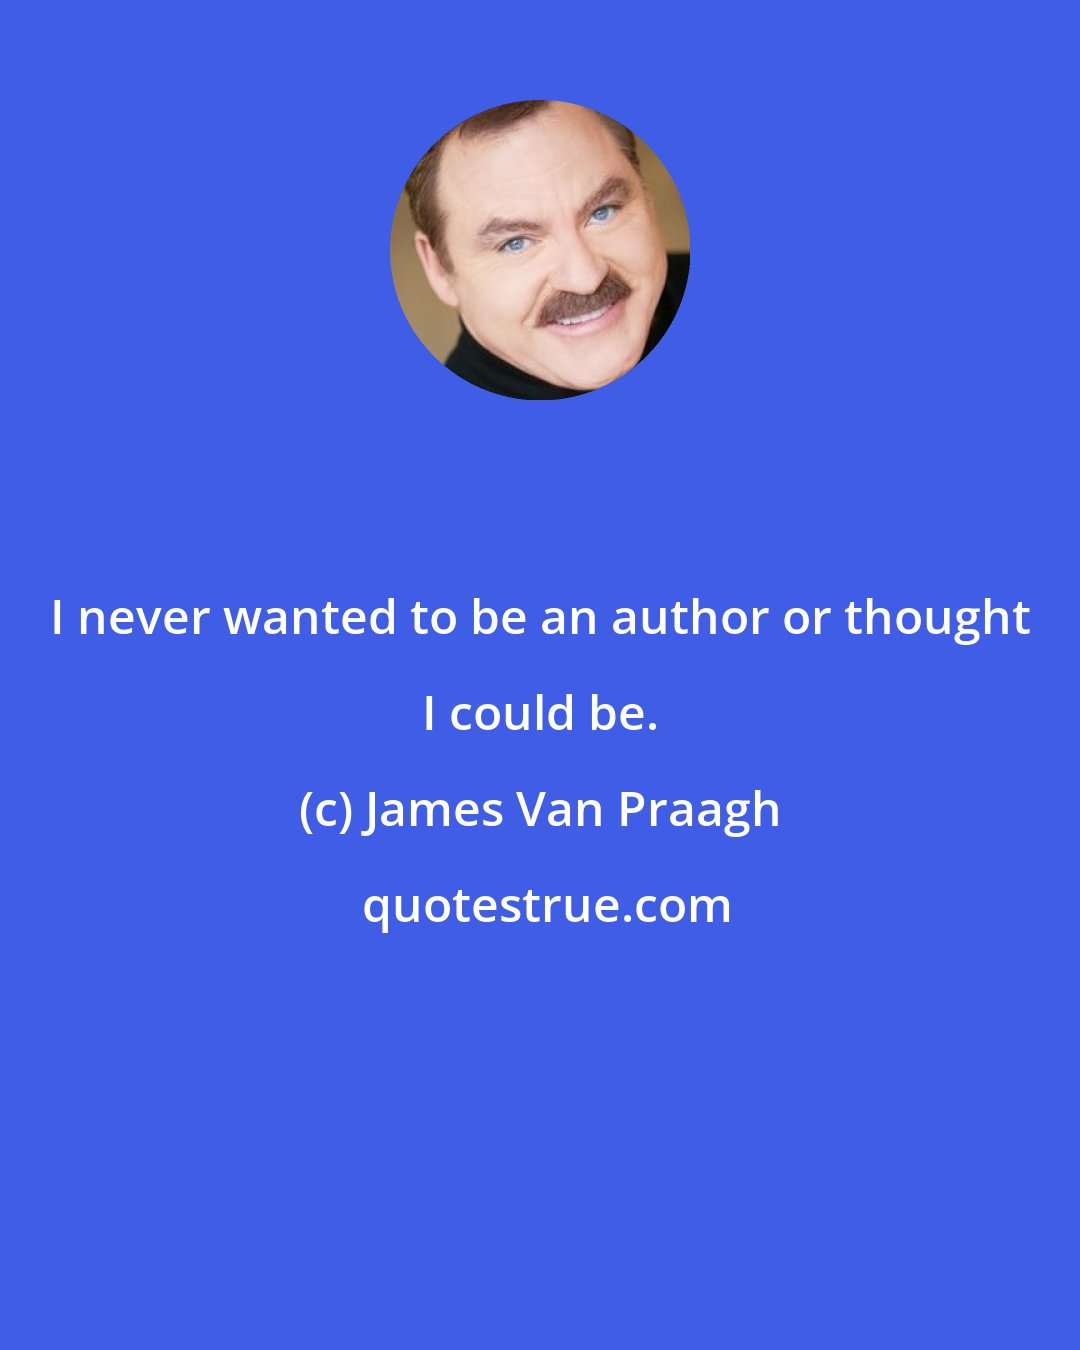 James Van Praagh: I never wanted to be an author or thought I could be.